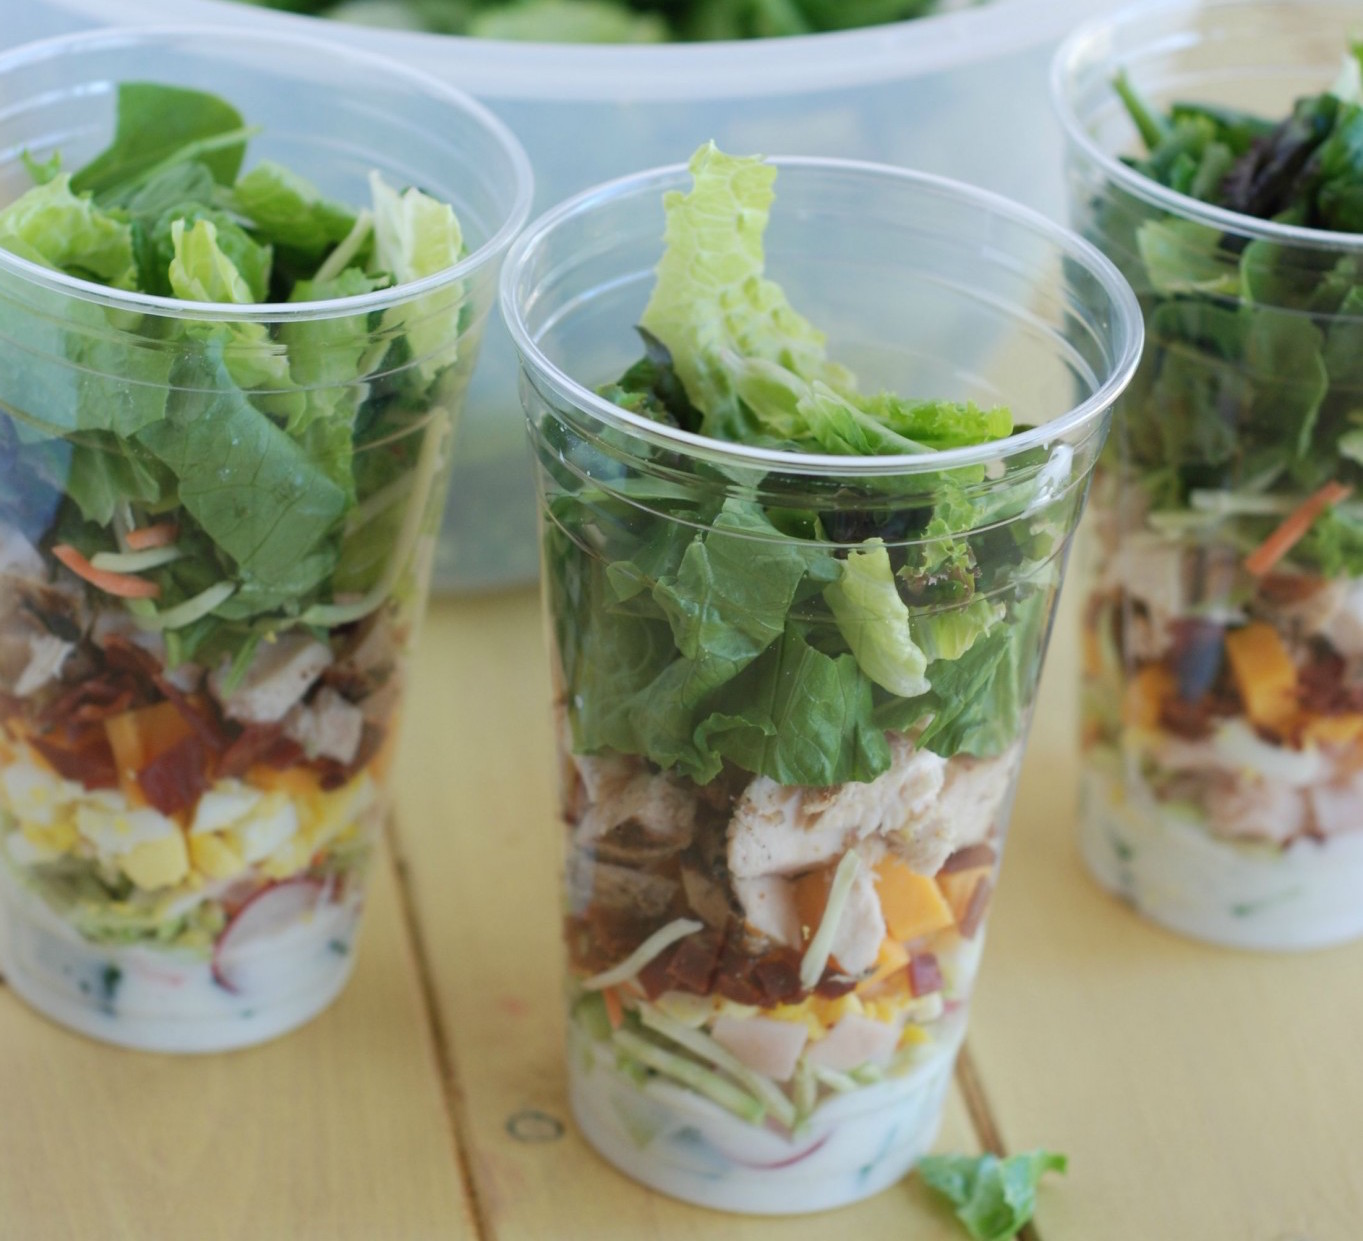 Salad in a Cup a great portable lunch